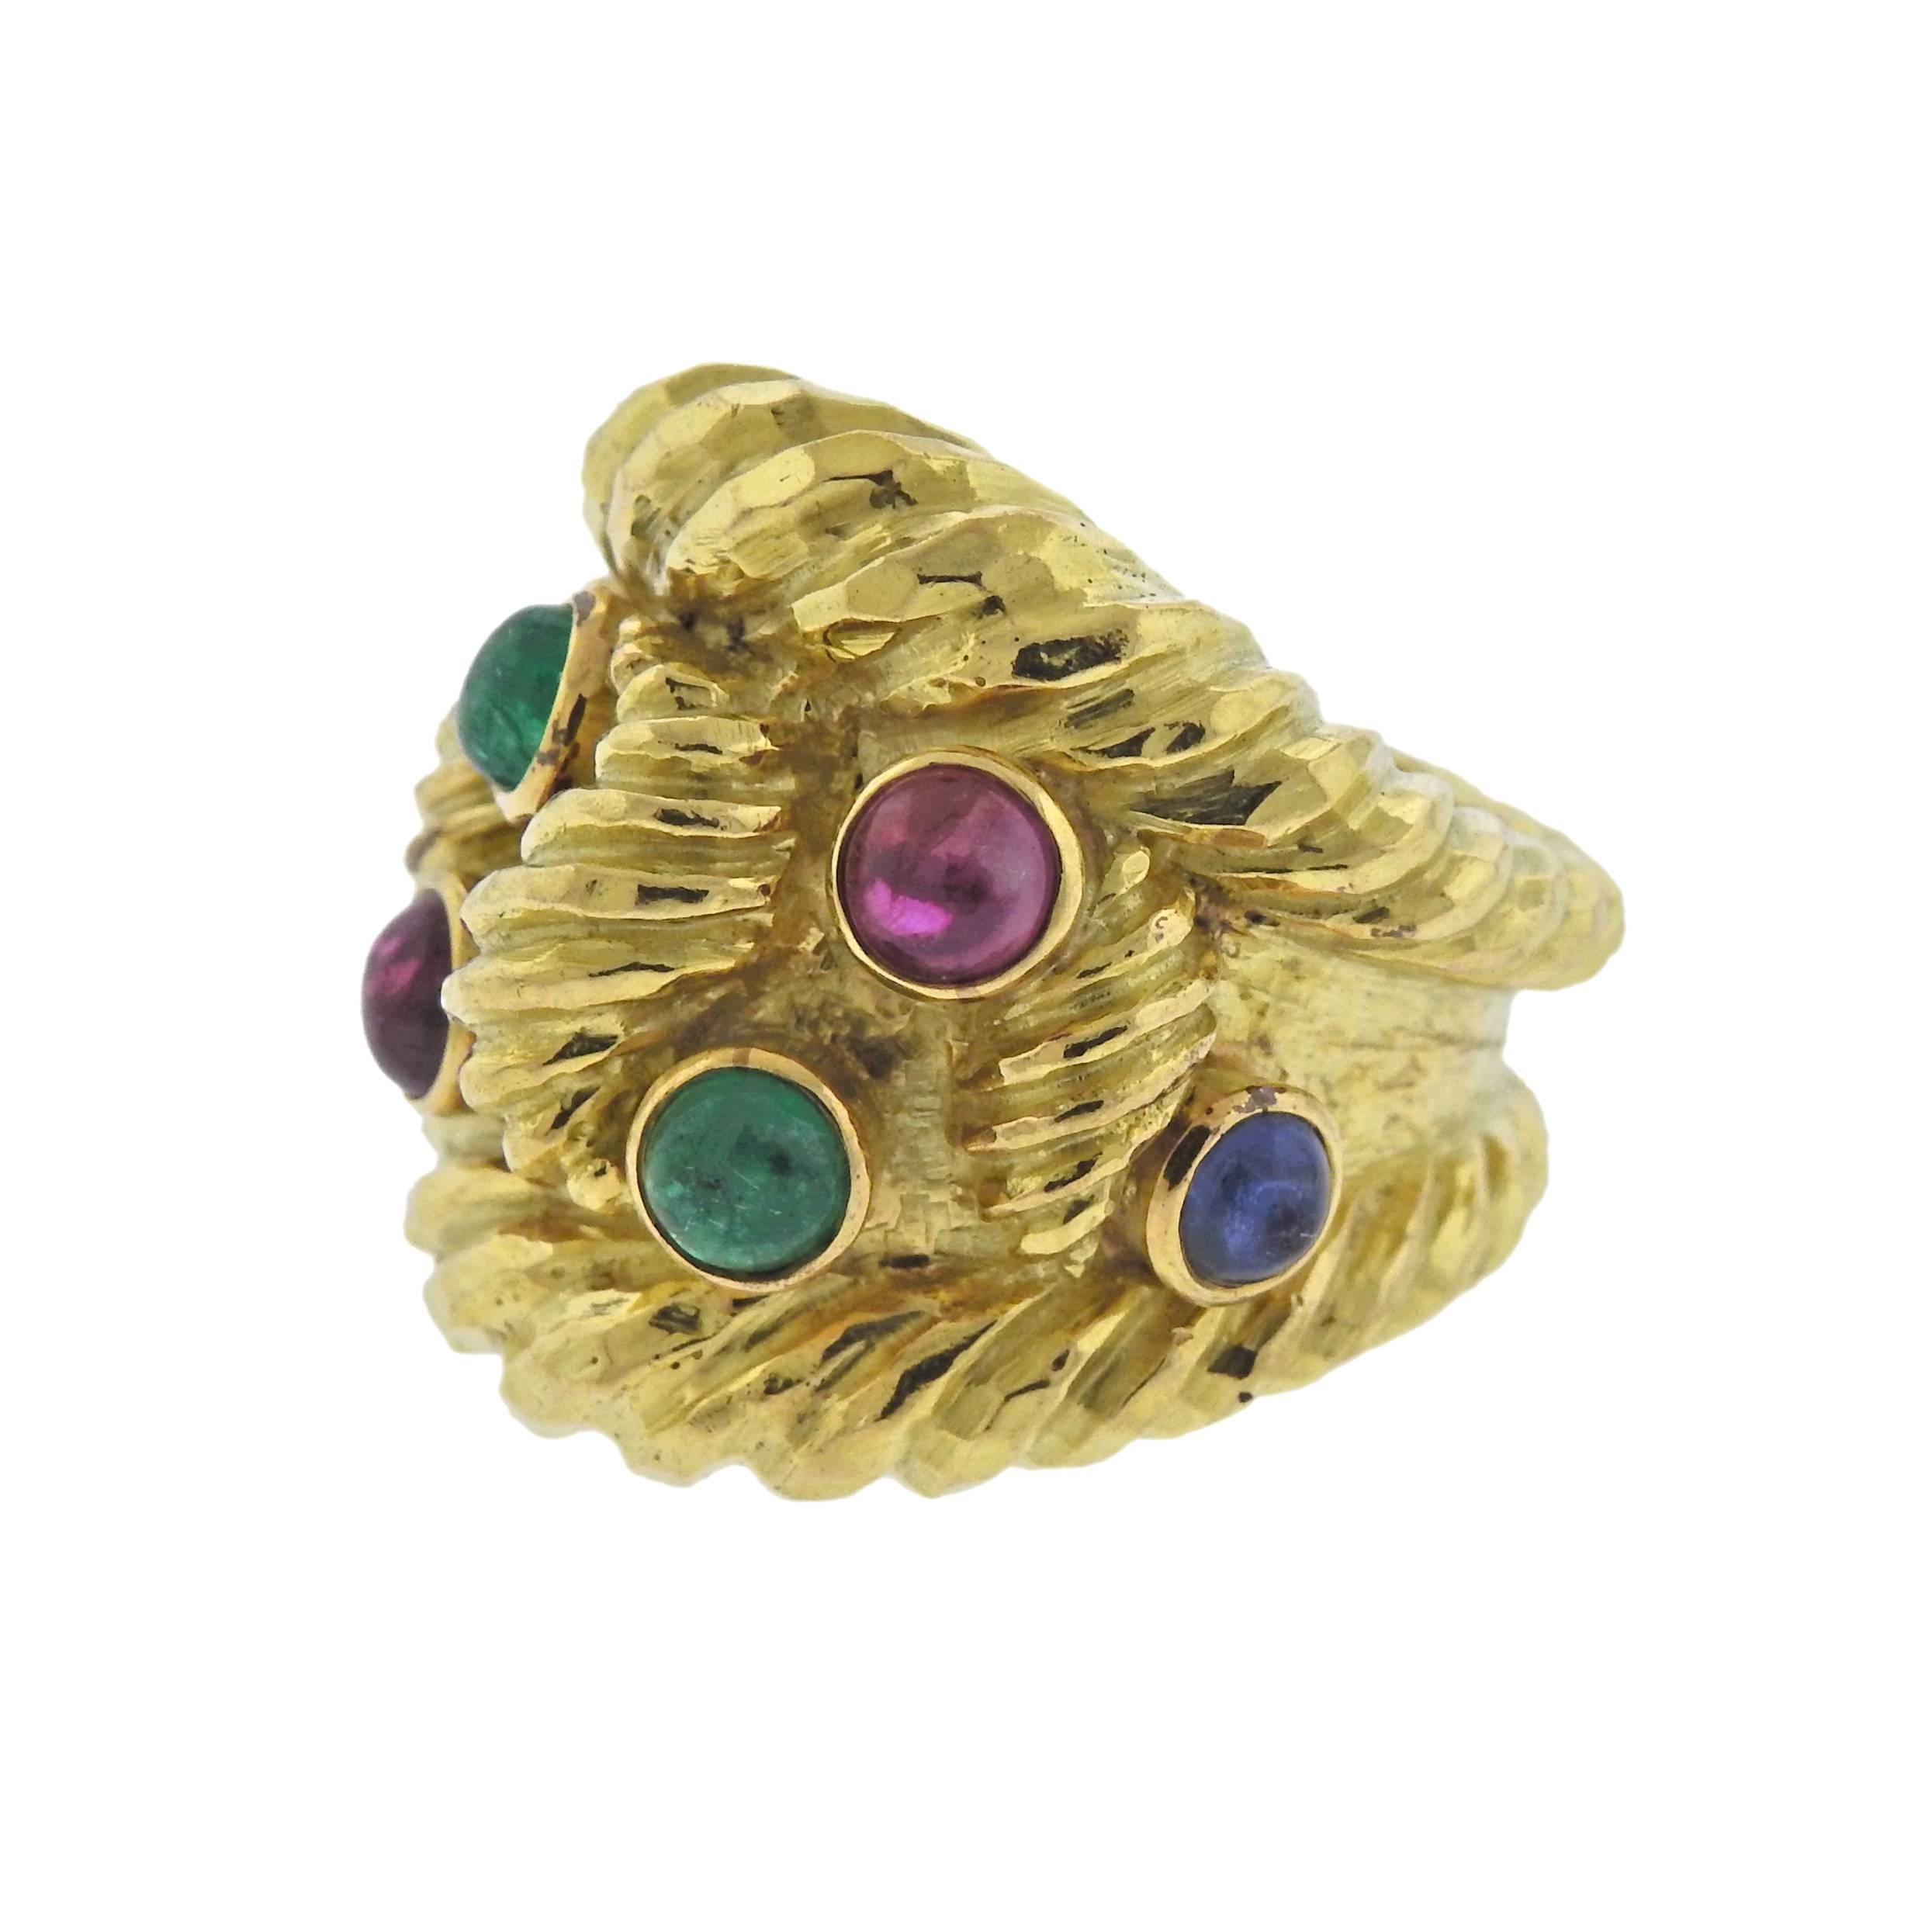 Impressive large 18k hammered gold ring by David Webb, decorated with ruby, sapphire and emerald cabochons. Ring size - 6 3/4, ring top is 25mm at widest point , weighs 31.8 grams. Marked: 18k, Webb.